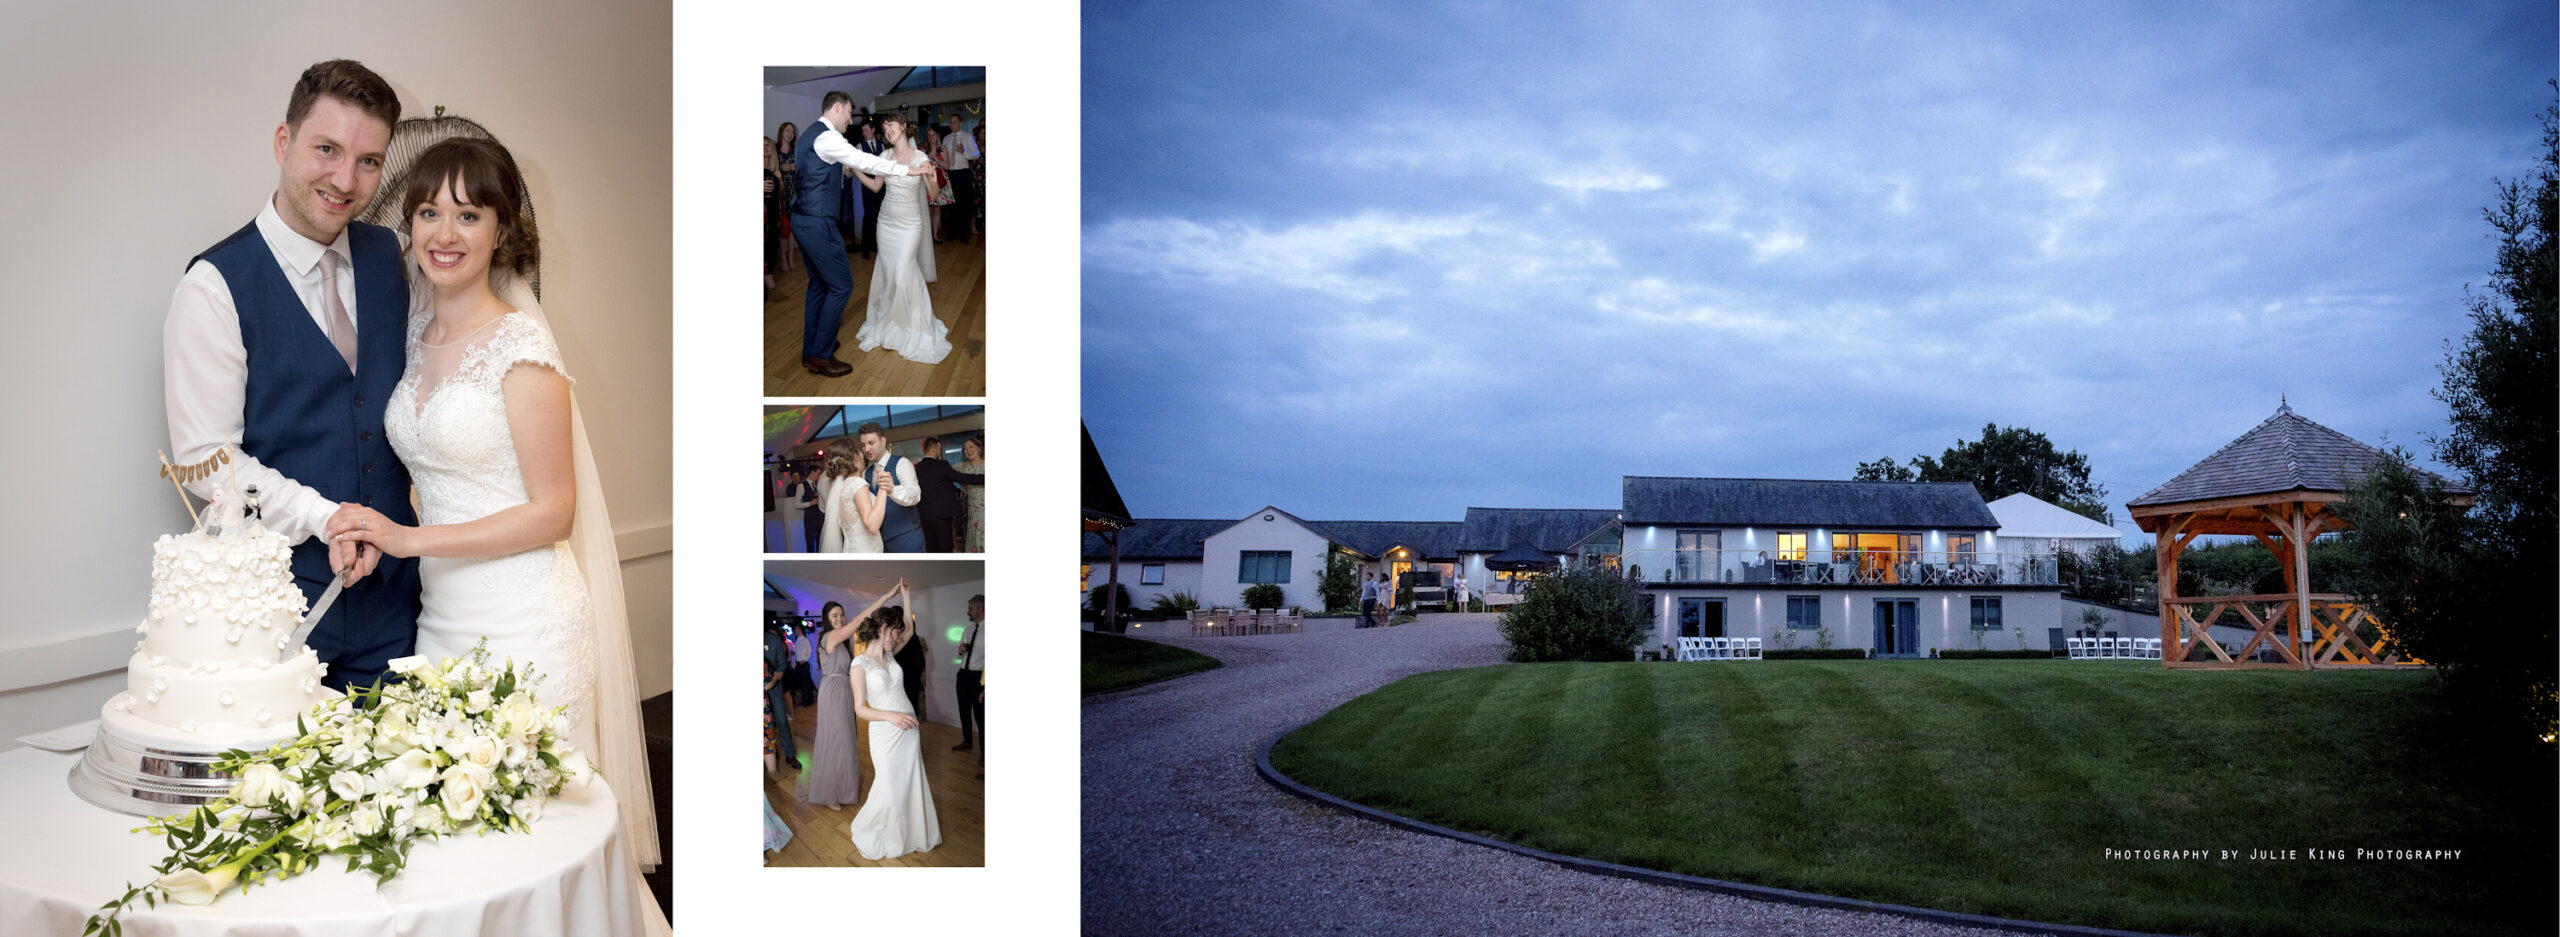 Wedding Photography Manor Hill House, Worcestershire